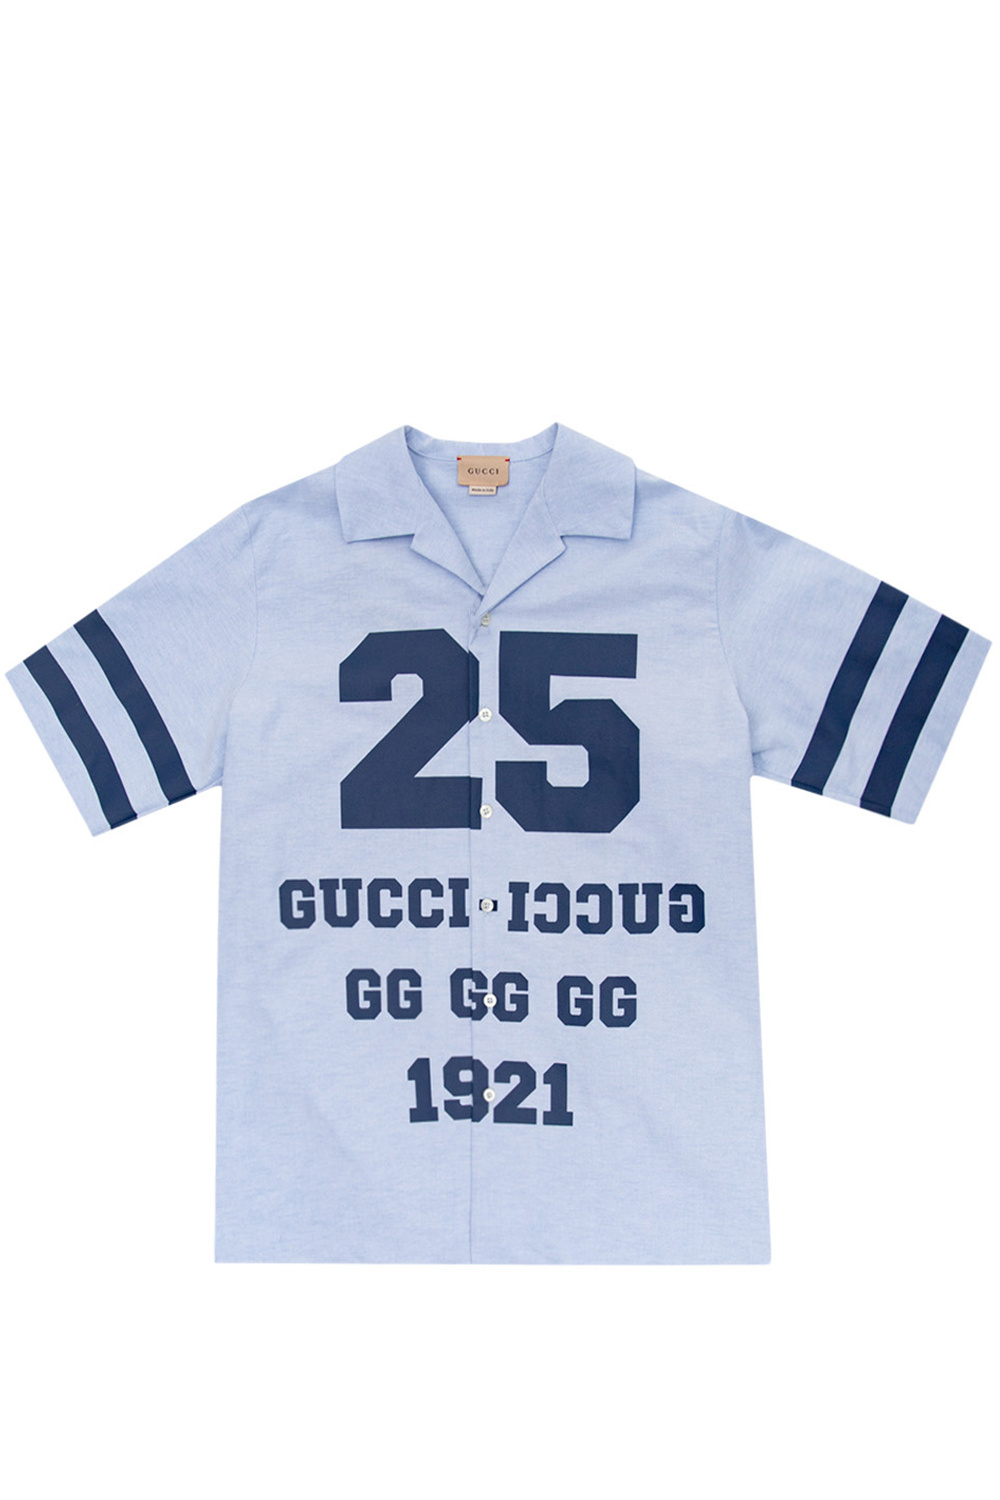 gucci Bee Kids ‘25 gucci Bee 1921’ shirt with logo